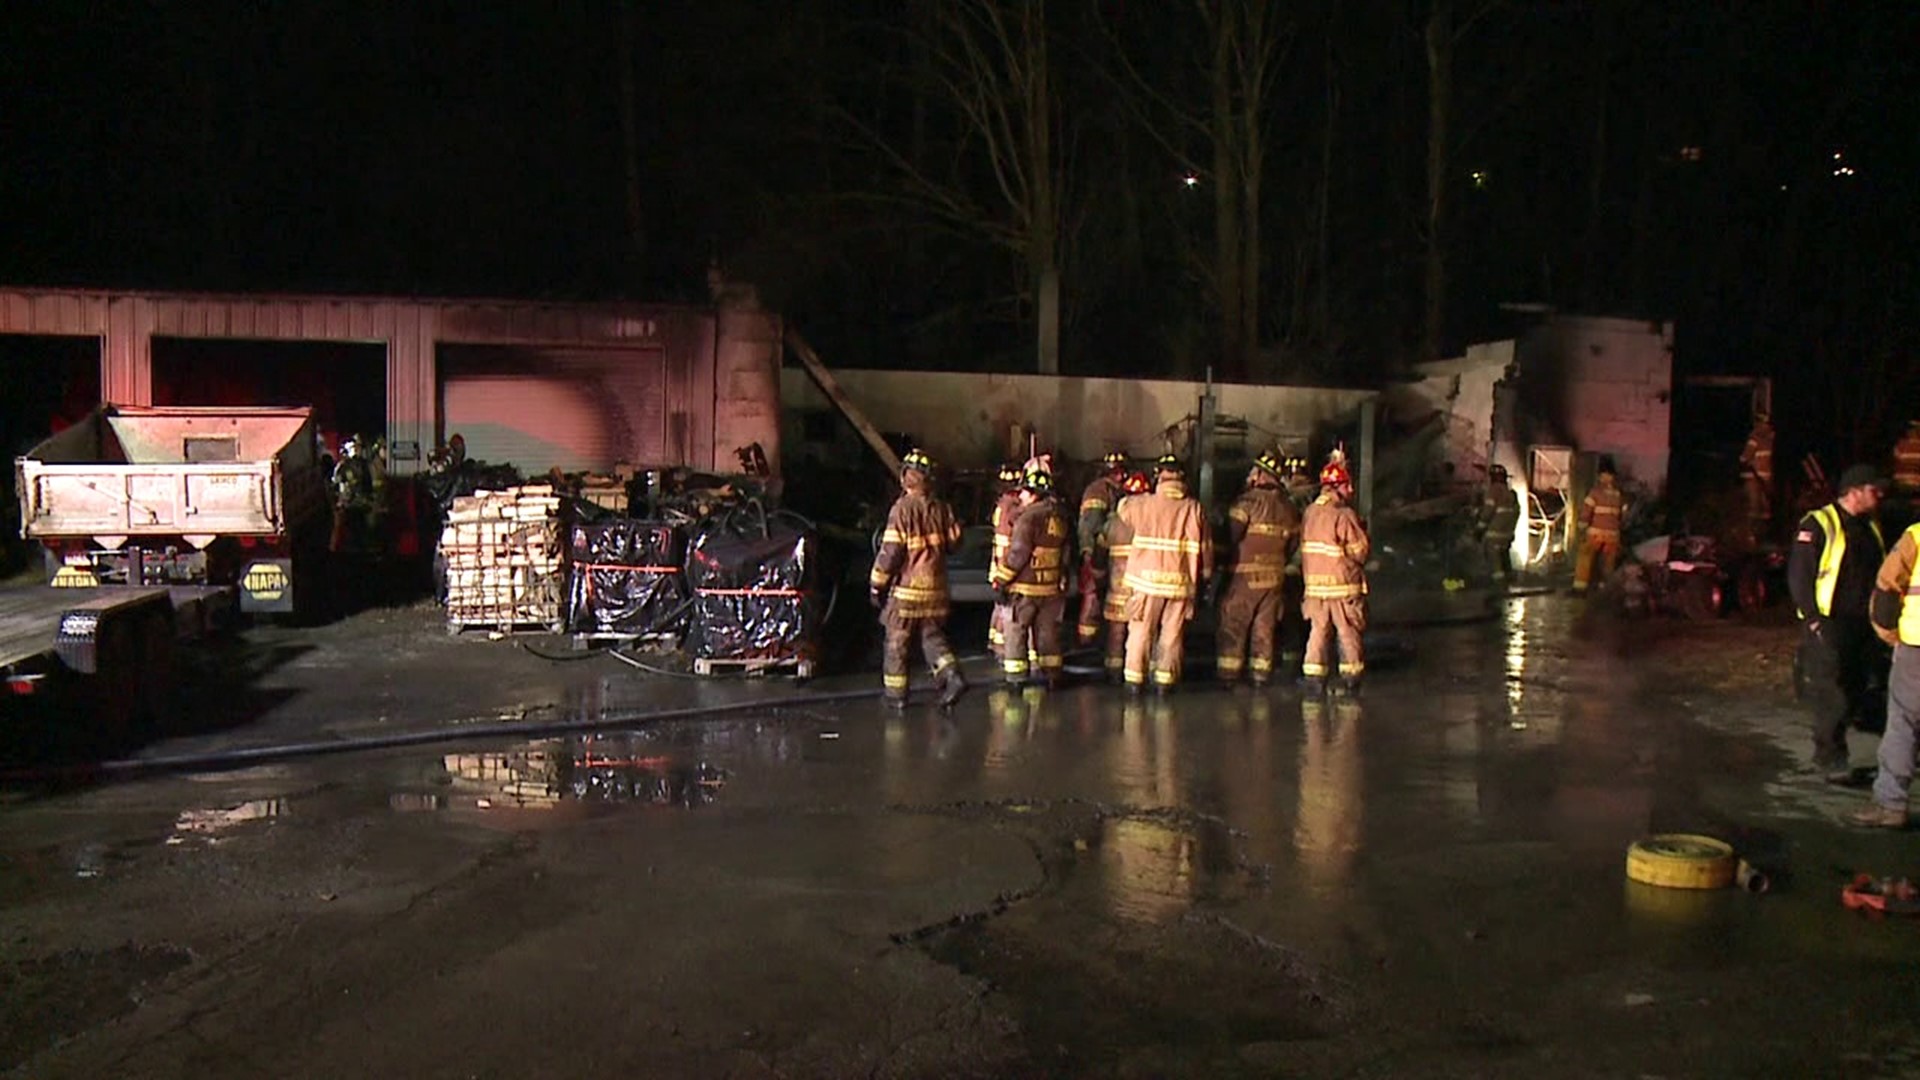 Flames broke out around 6:30 p.m. along Twin Drive in Tunkhannock Sunday night.